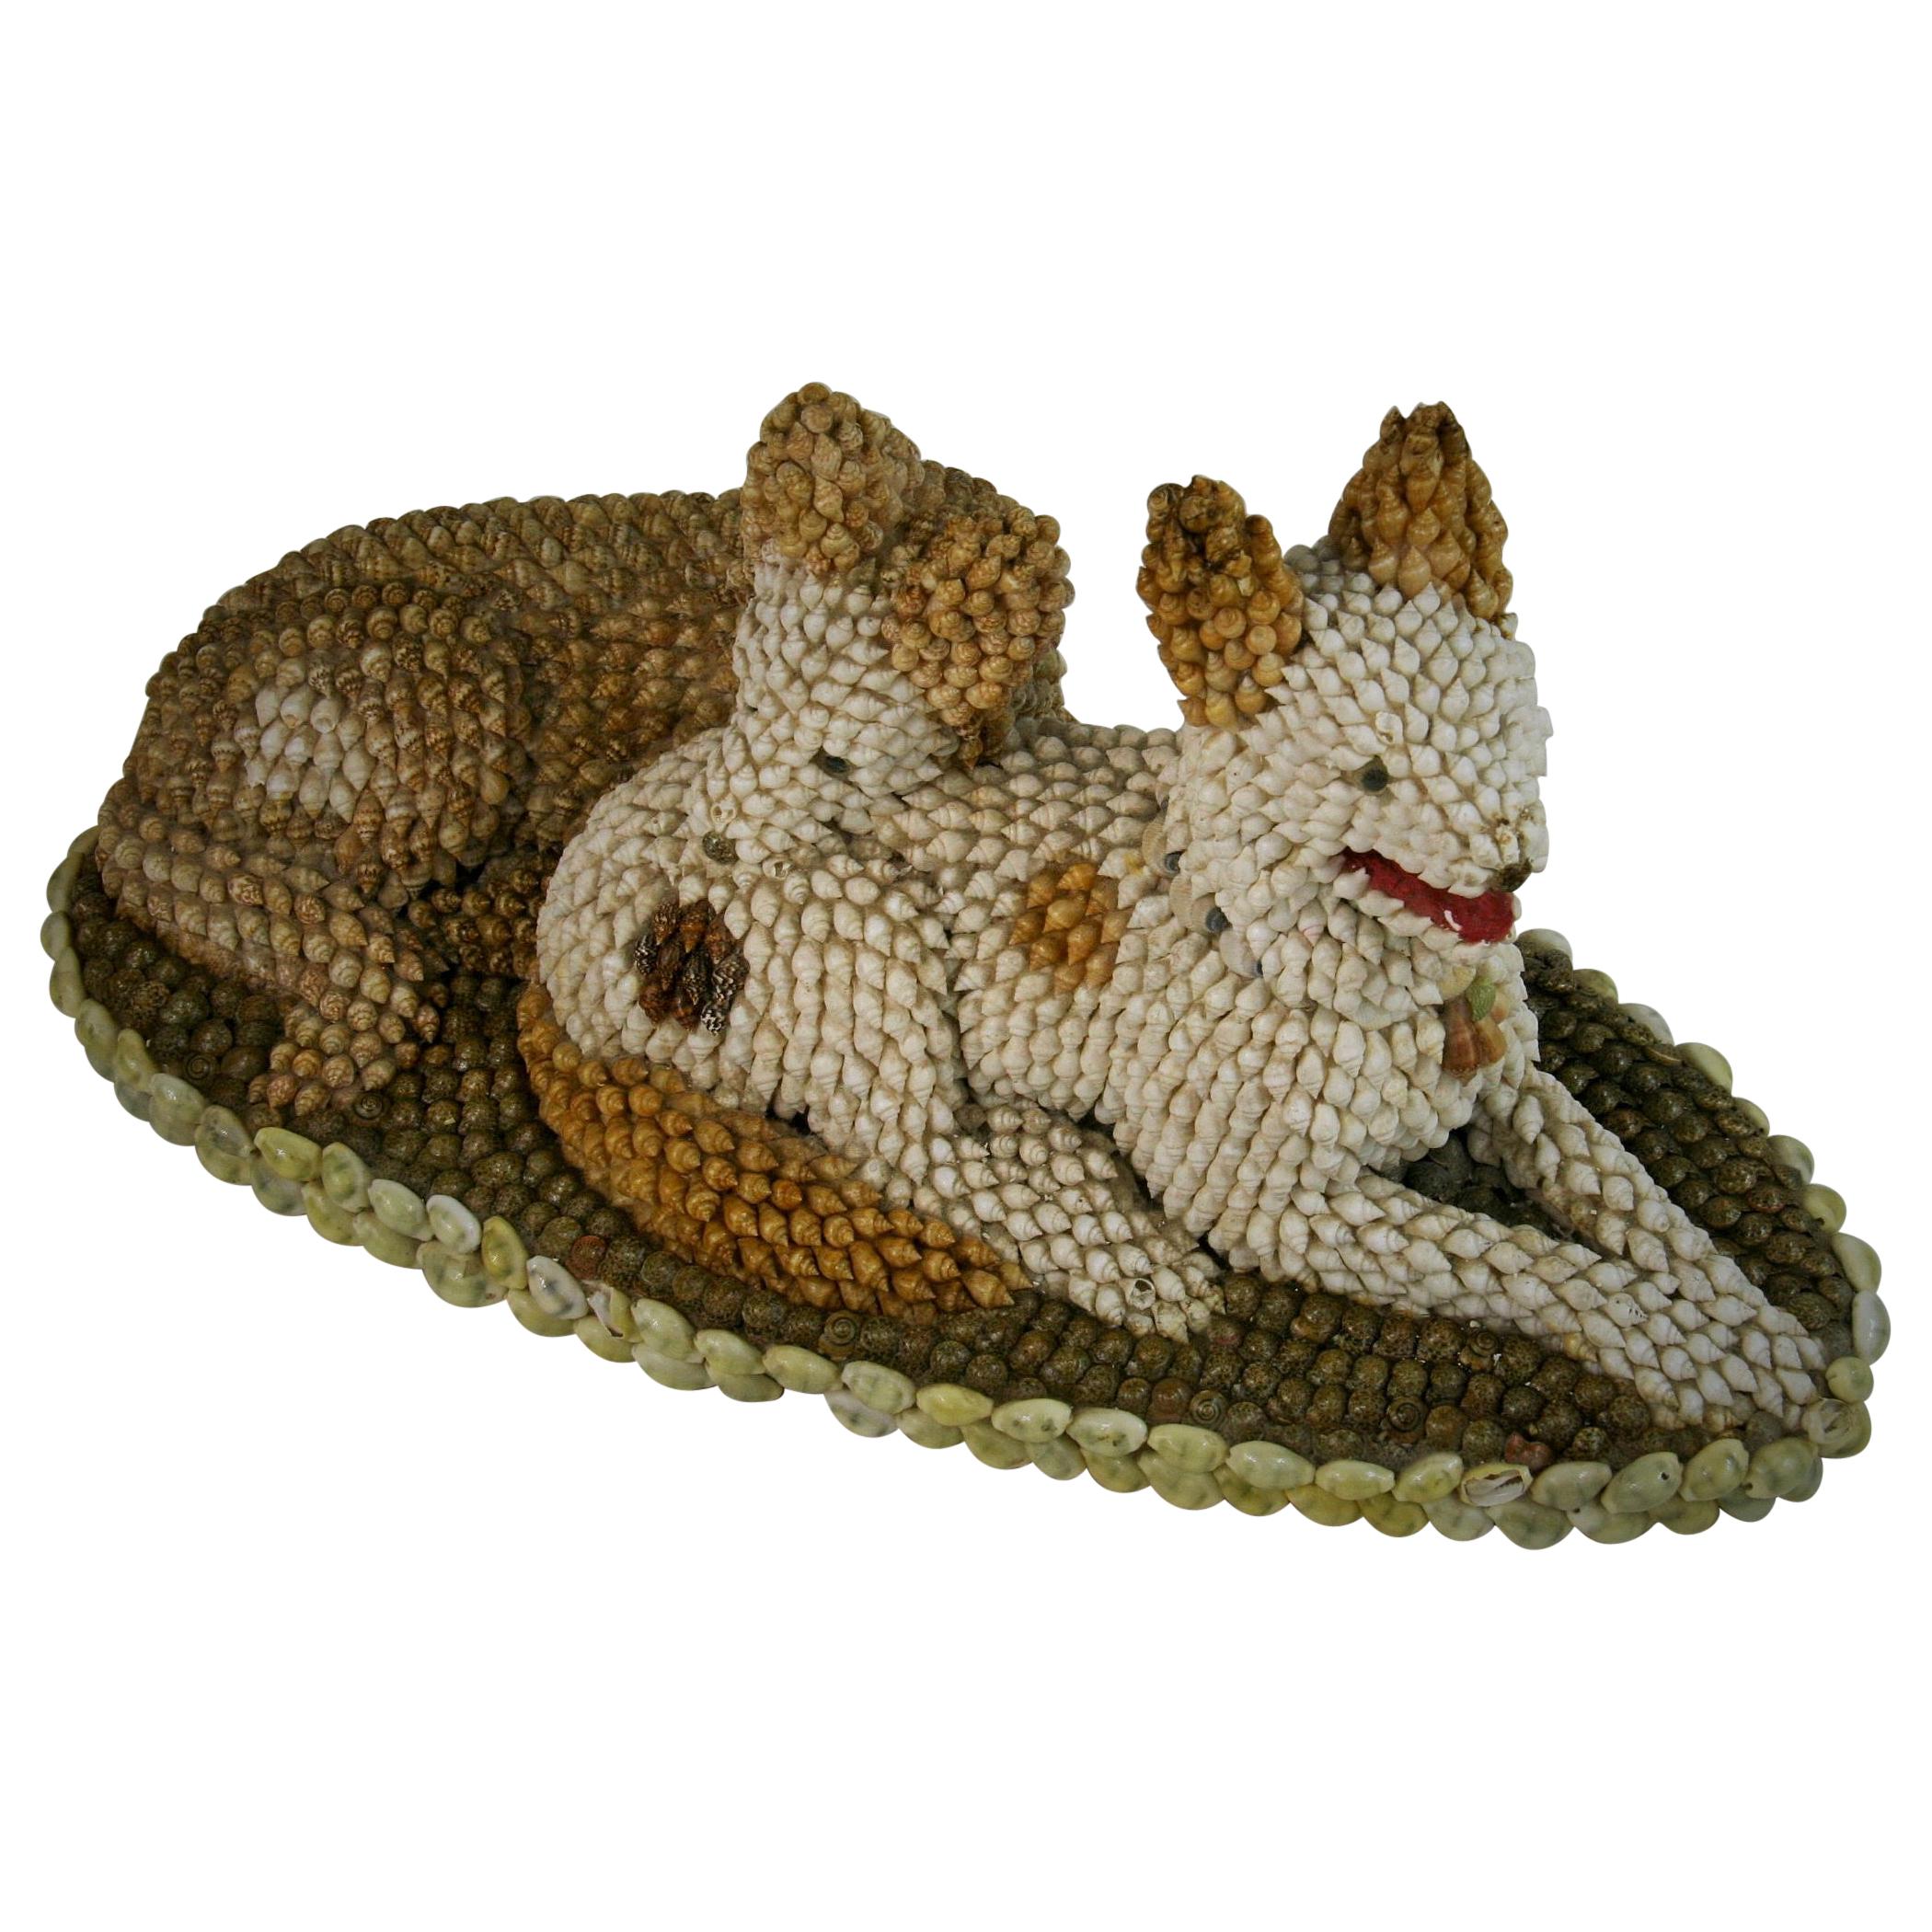 2-327 Amazing folk art  sculpture of two dogs made from various size and colors and shape sea shells.